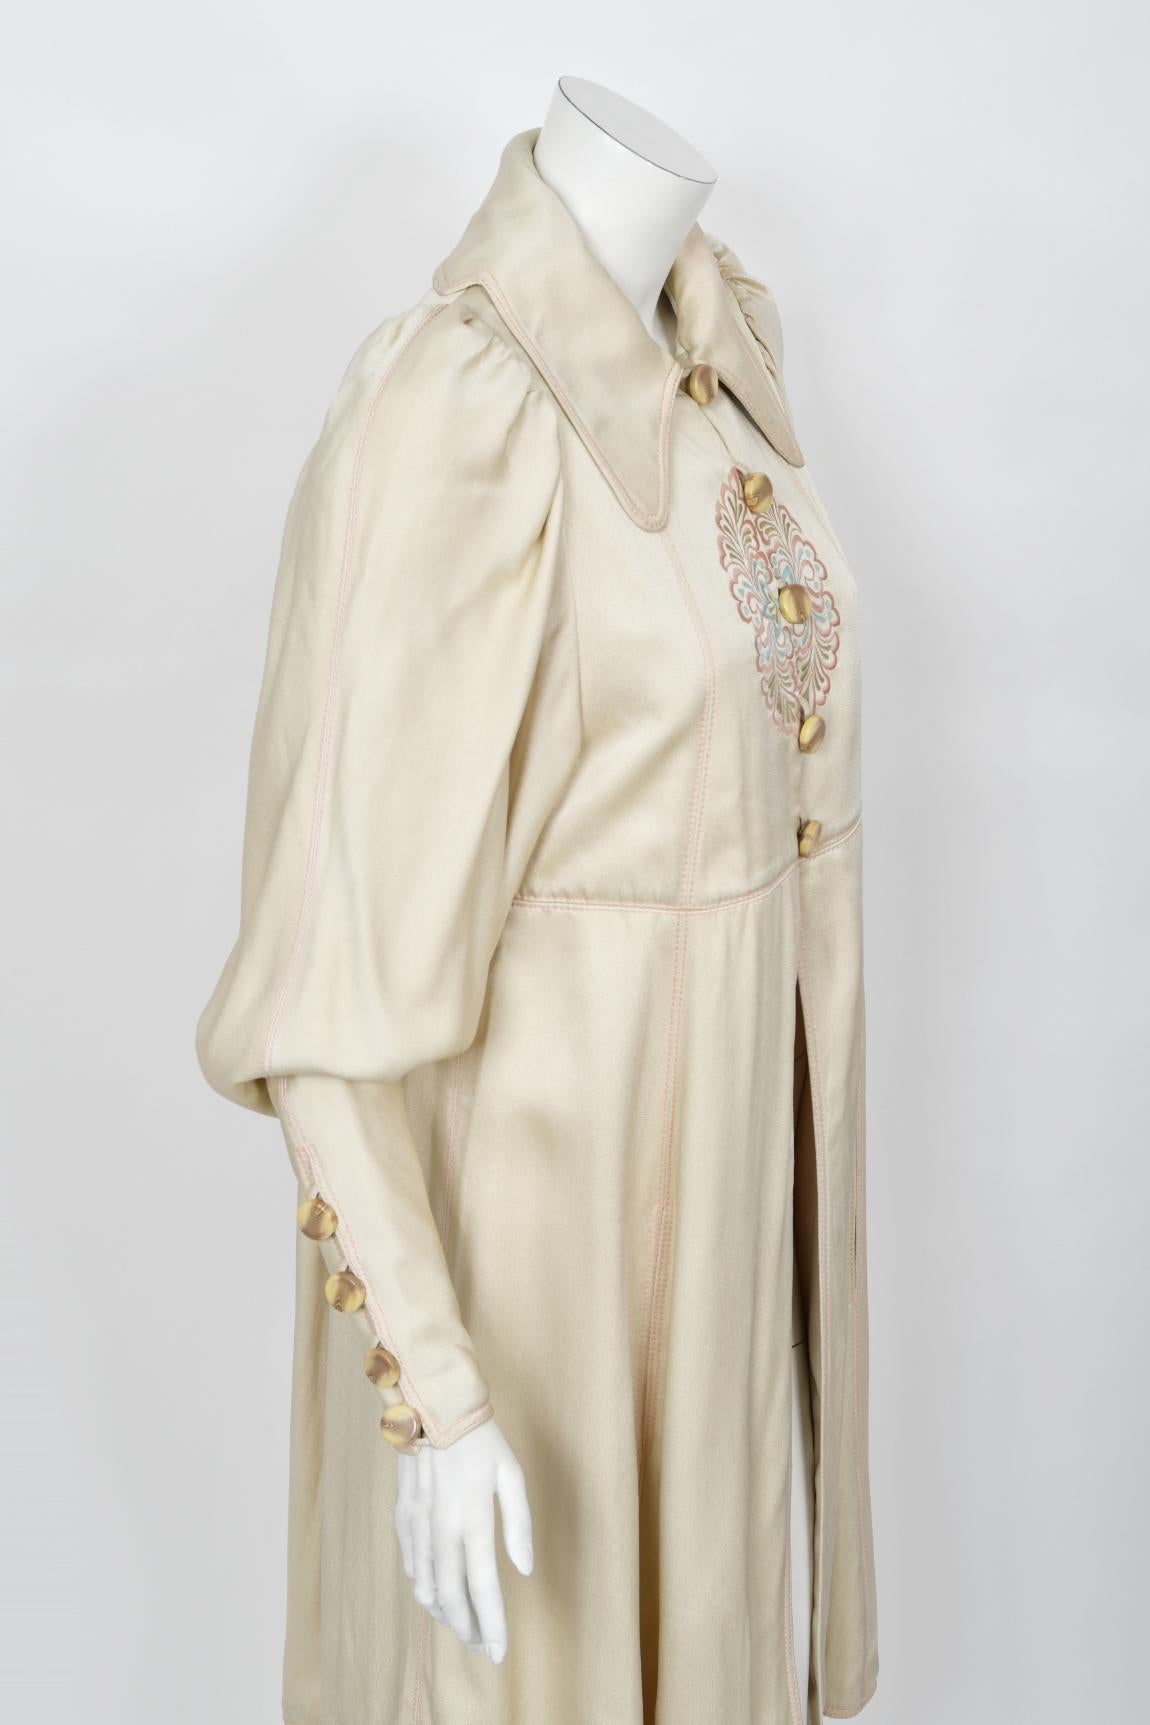 Vintage 1970's Bill Gibb Couture Embroidered Satin Mutton-Sleeve Jacket & Vest  For Sale 9